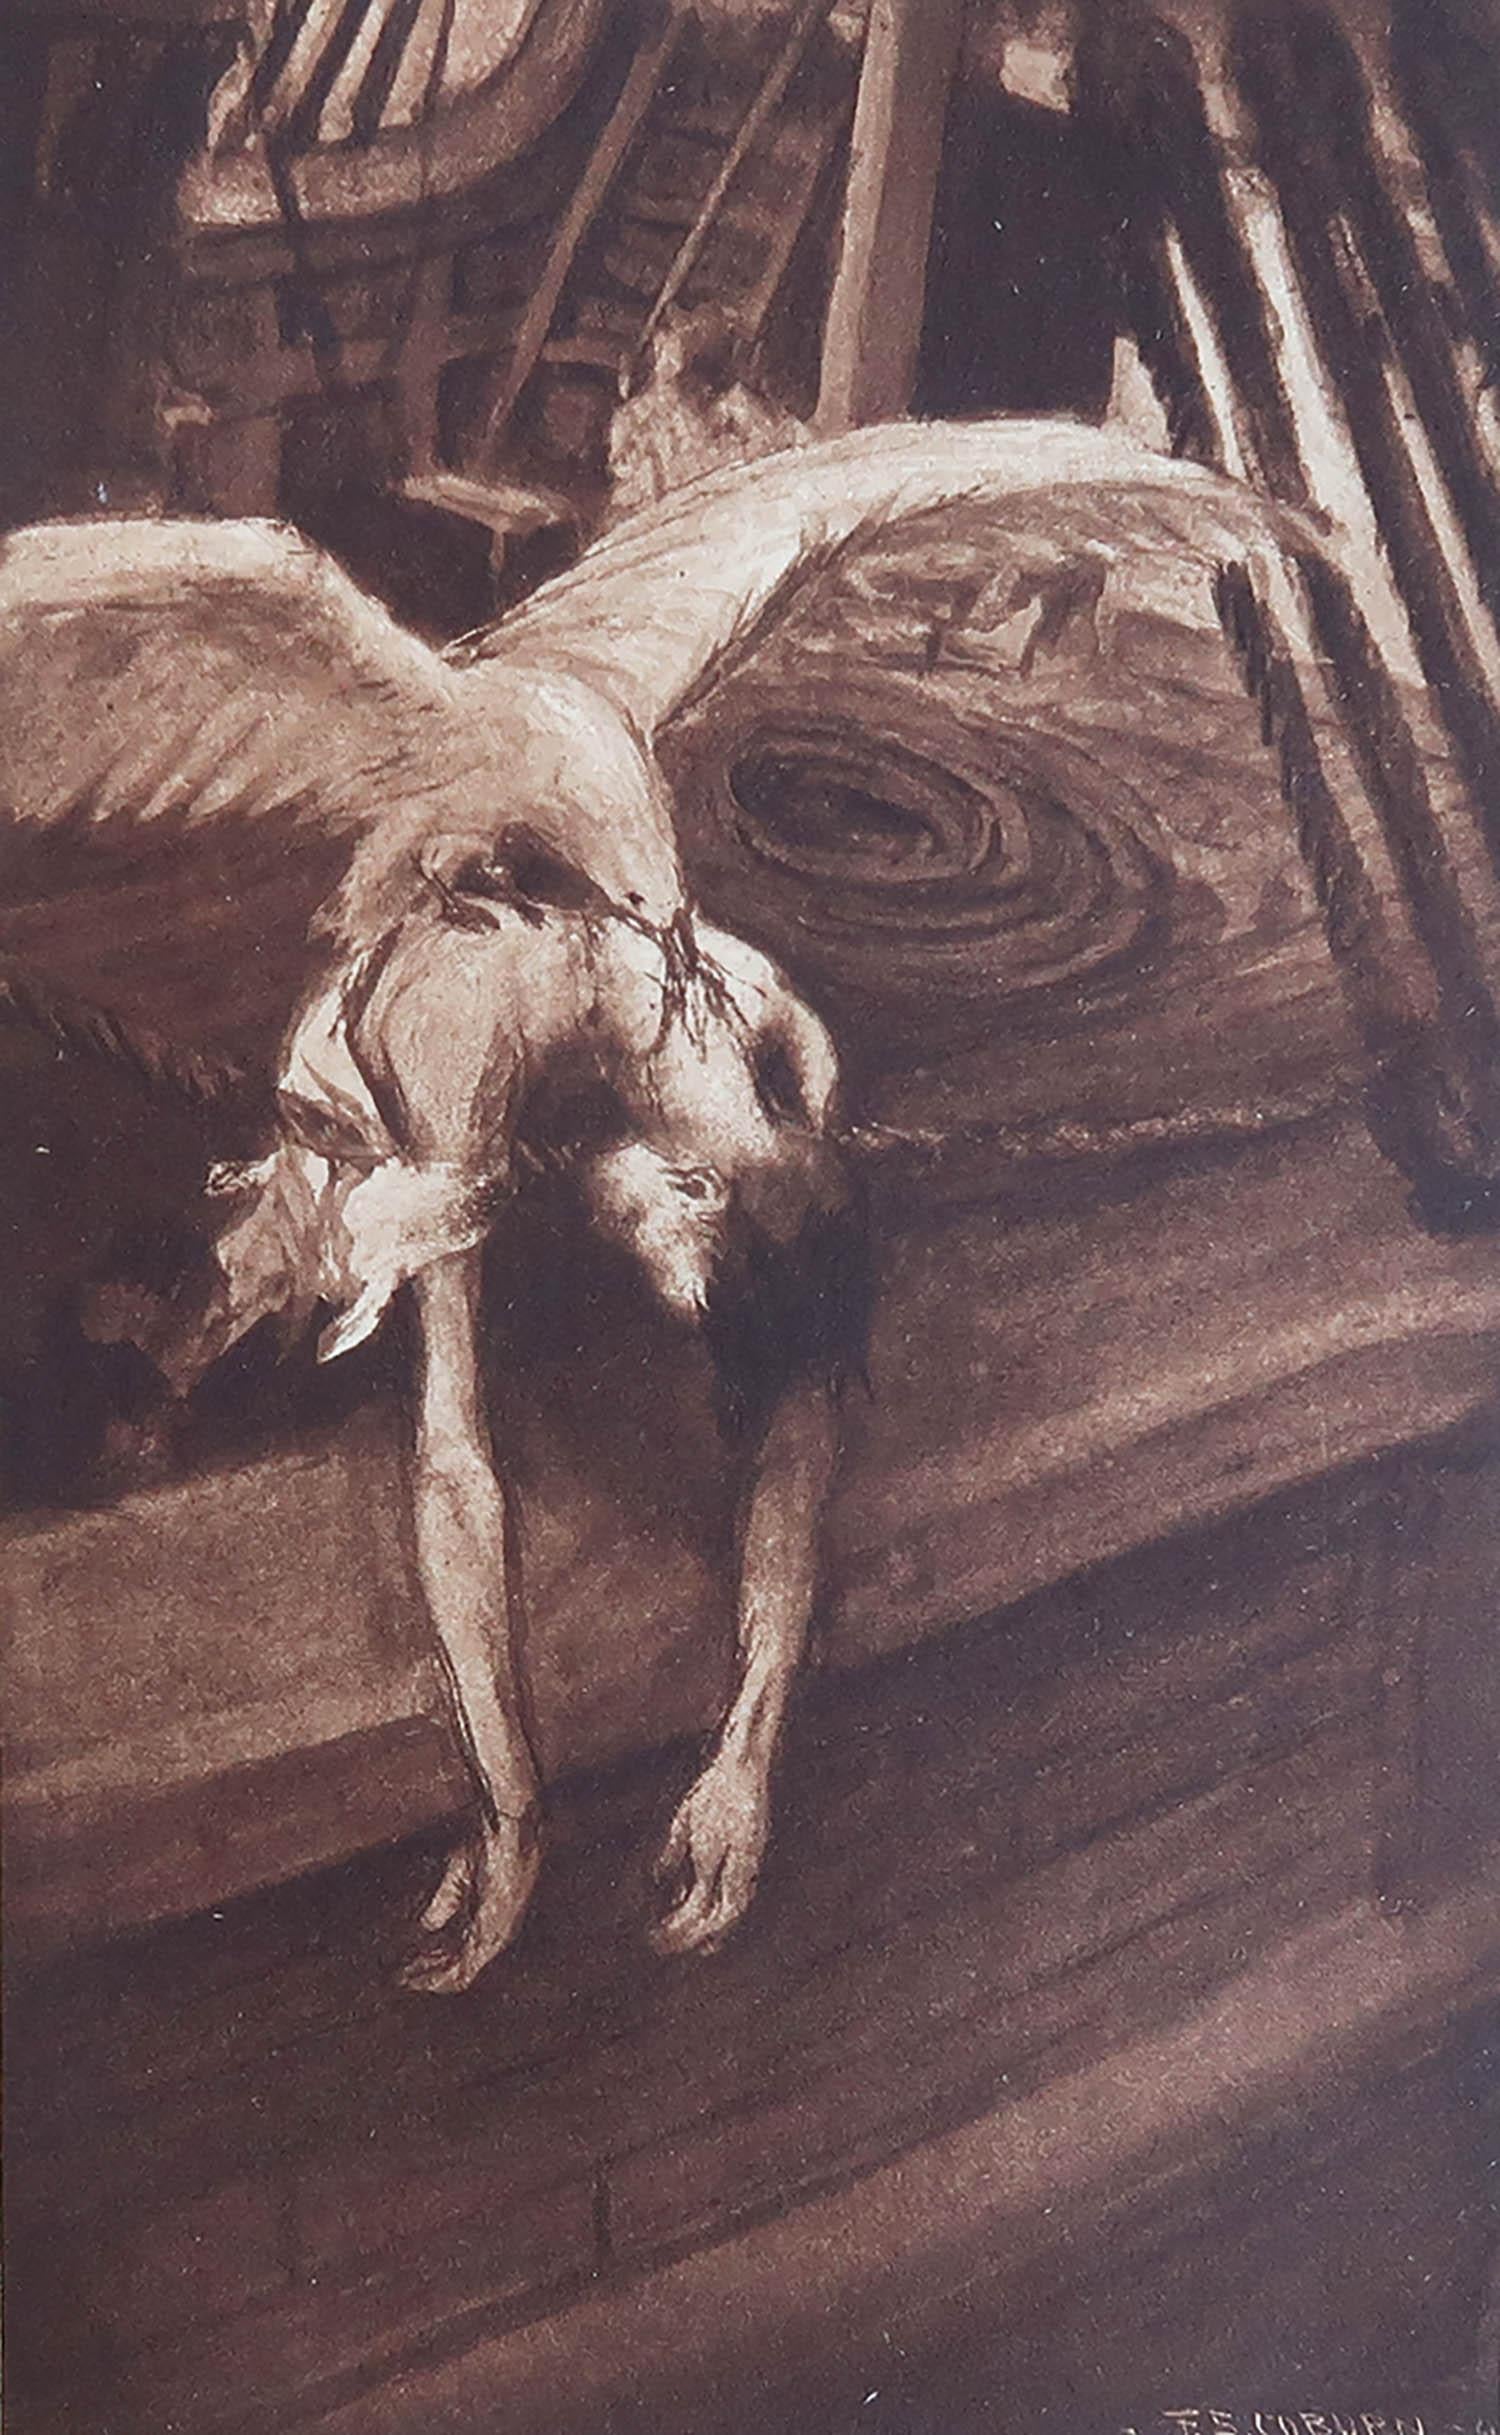 Sensational image by Frederick Simpson Coburn

In the style of one of my favourite artists, Goya

Photogravure

Limited edition of 300. This is No. 84

From The Complete Works of Edgar Allen Poe

Published by Putnam, New York. 1902

On hand made